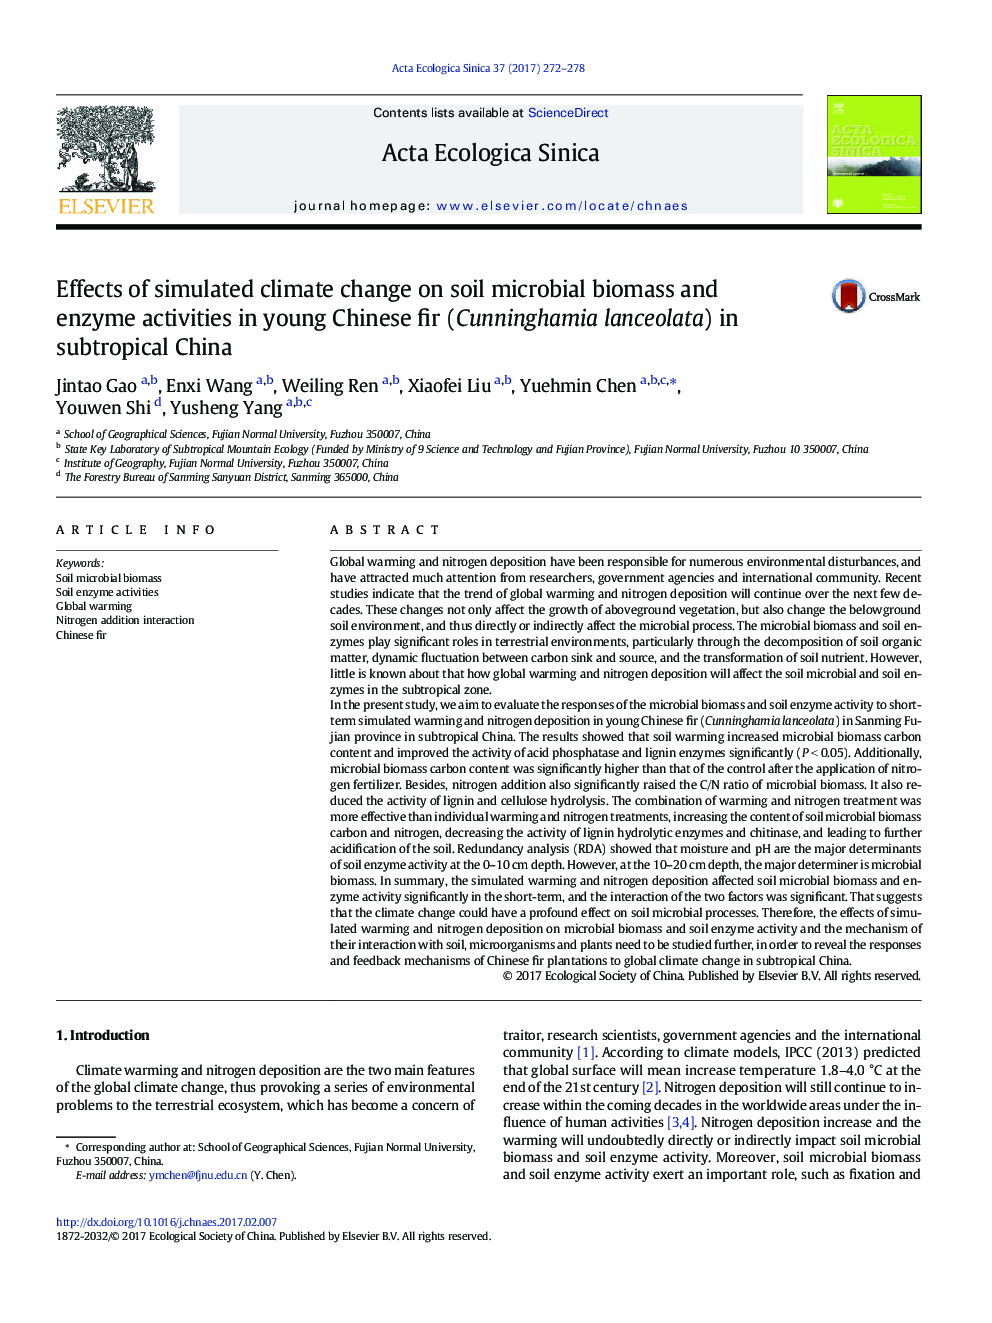 Effects of simulated climate change on soil microbial biomass and enzyme activities in young Chinese fir (Cunninghamia lanceolata) in subtropical China